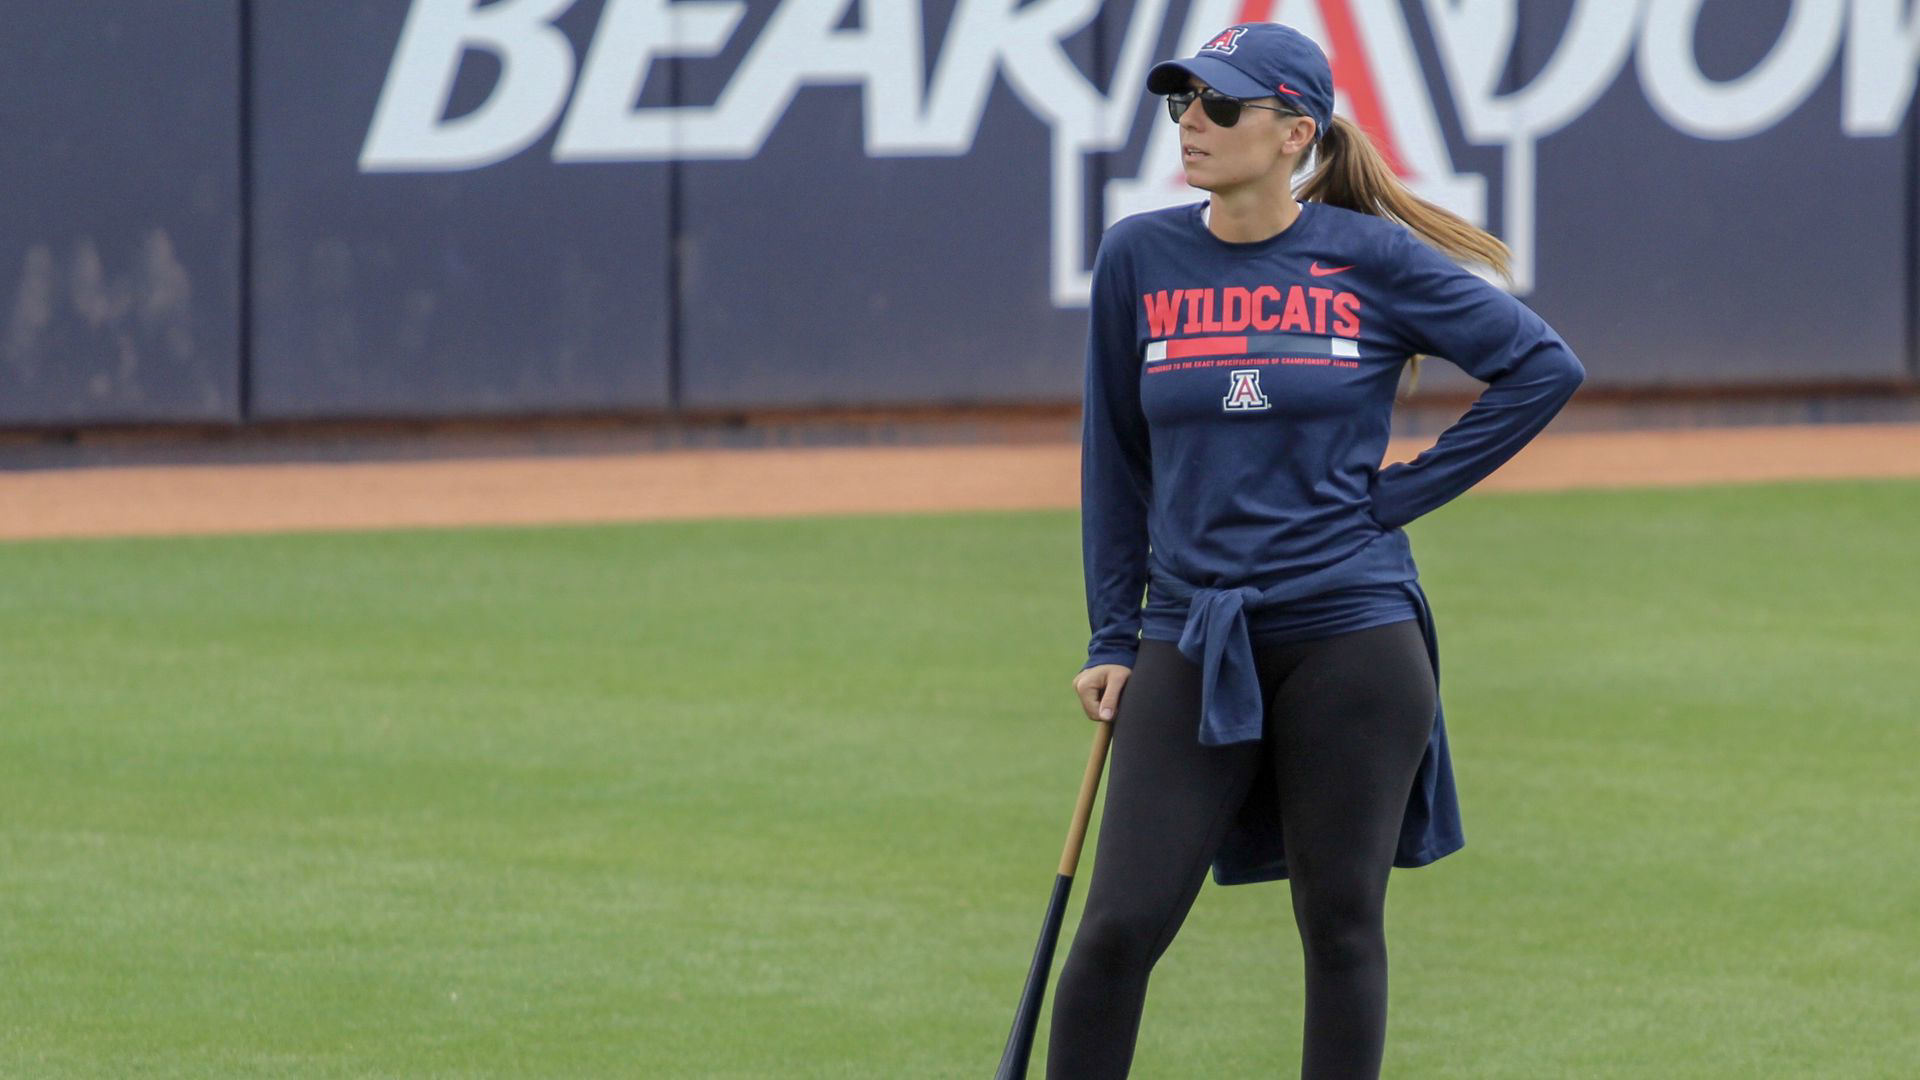 Arizona softball starts the class of 2025 with commitment from RHP